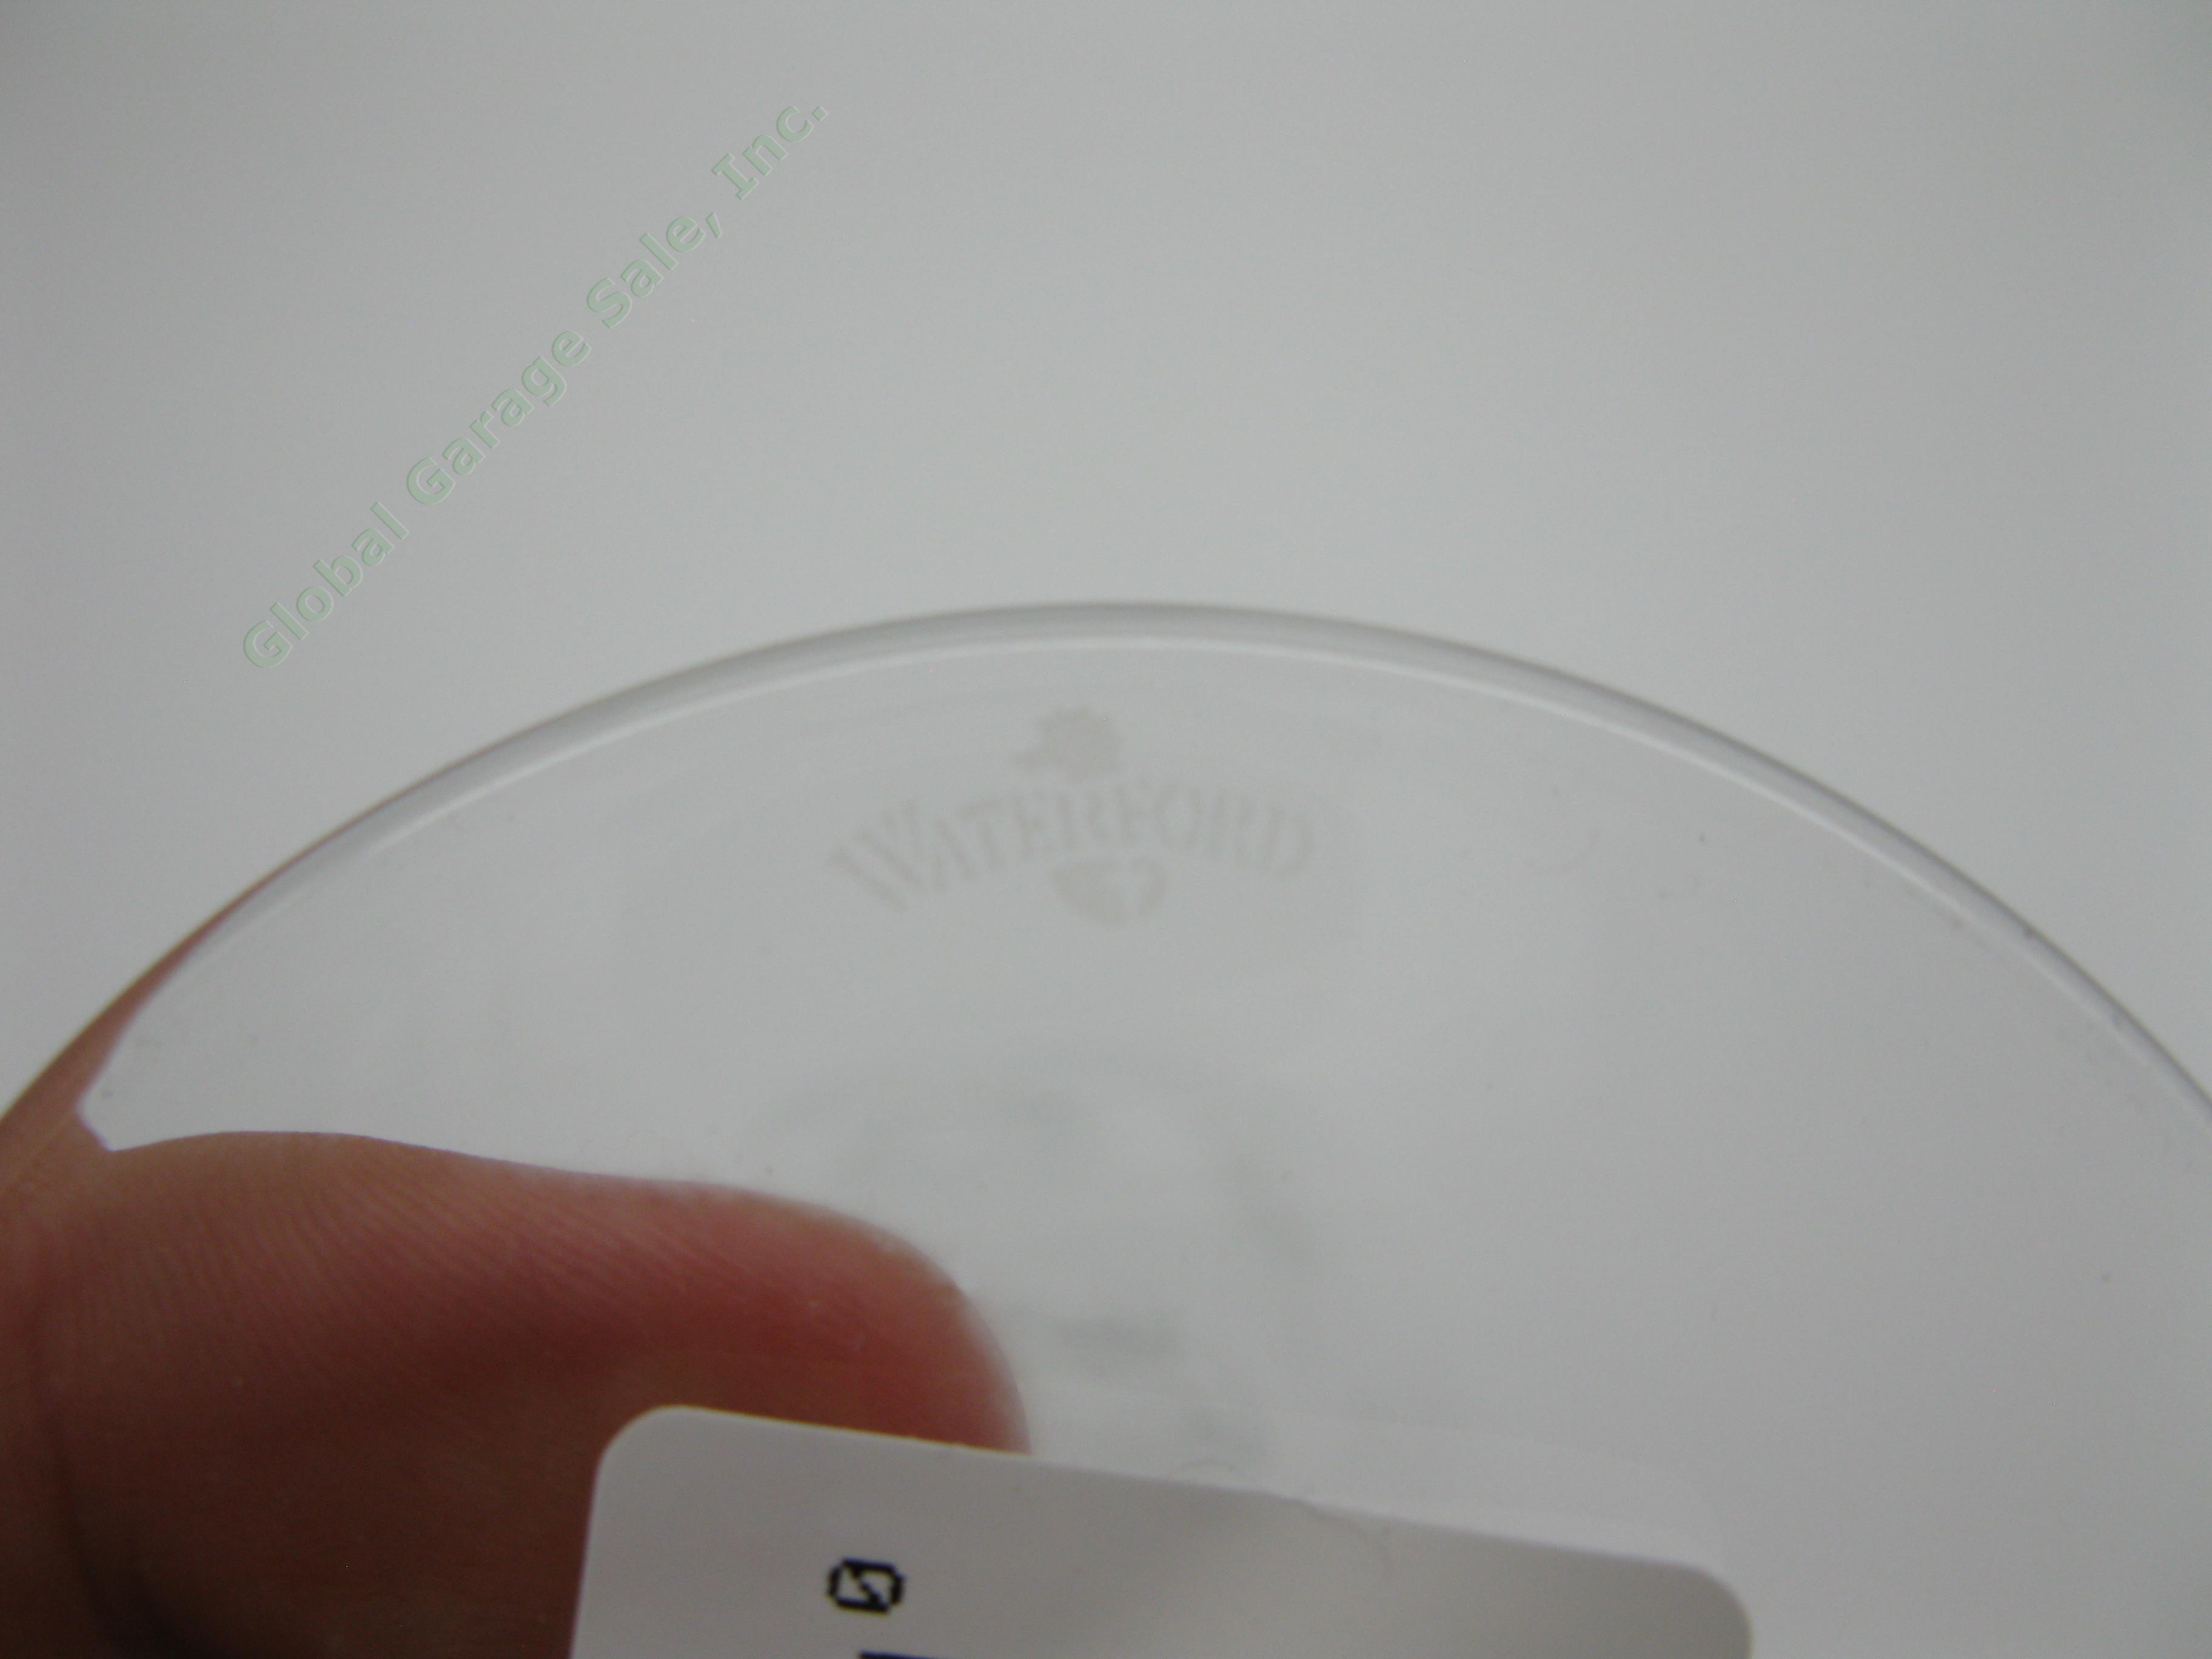 4 Waterford Crystal Millennium Universal-5 Toasting Flute Champagne Glasses NR! 24